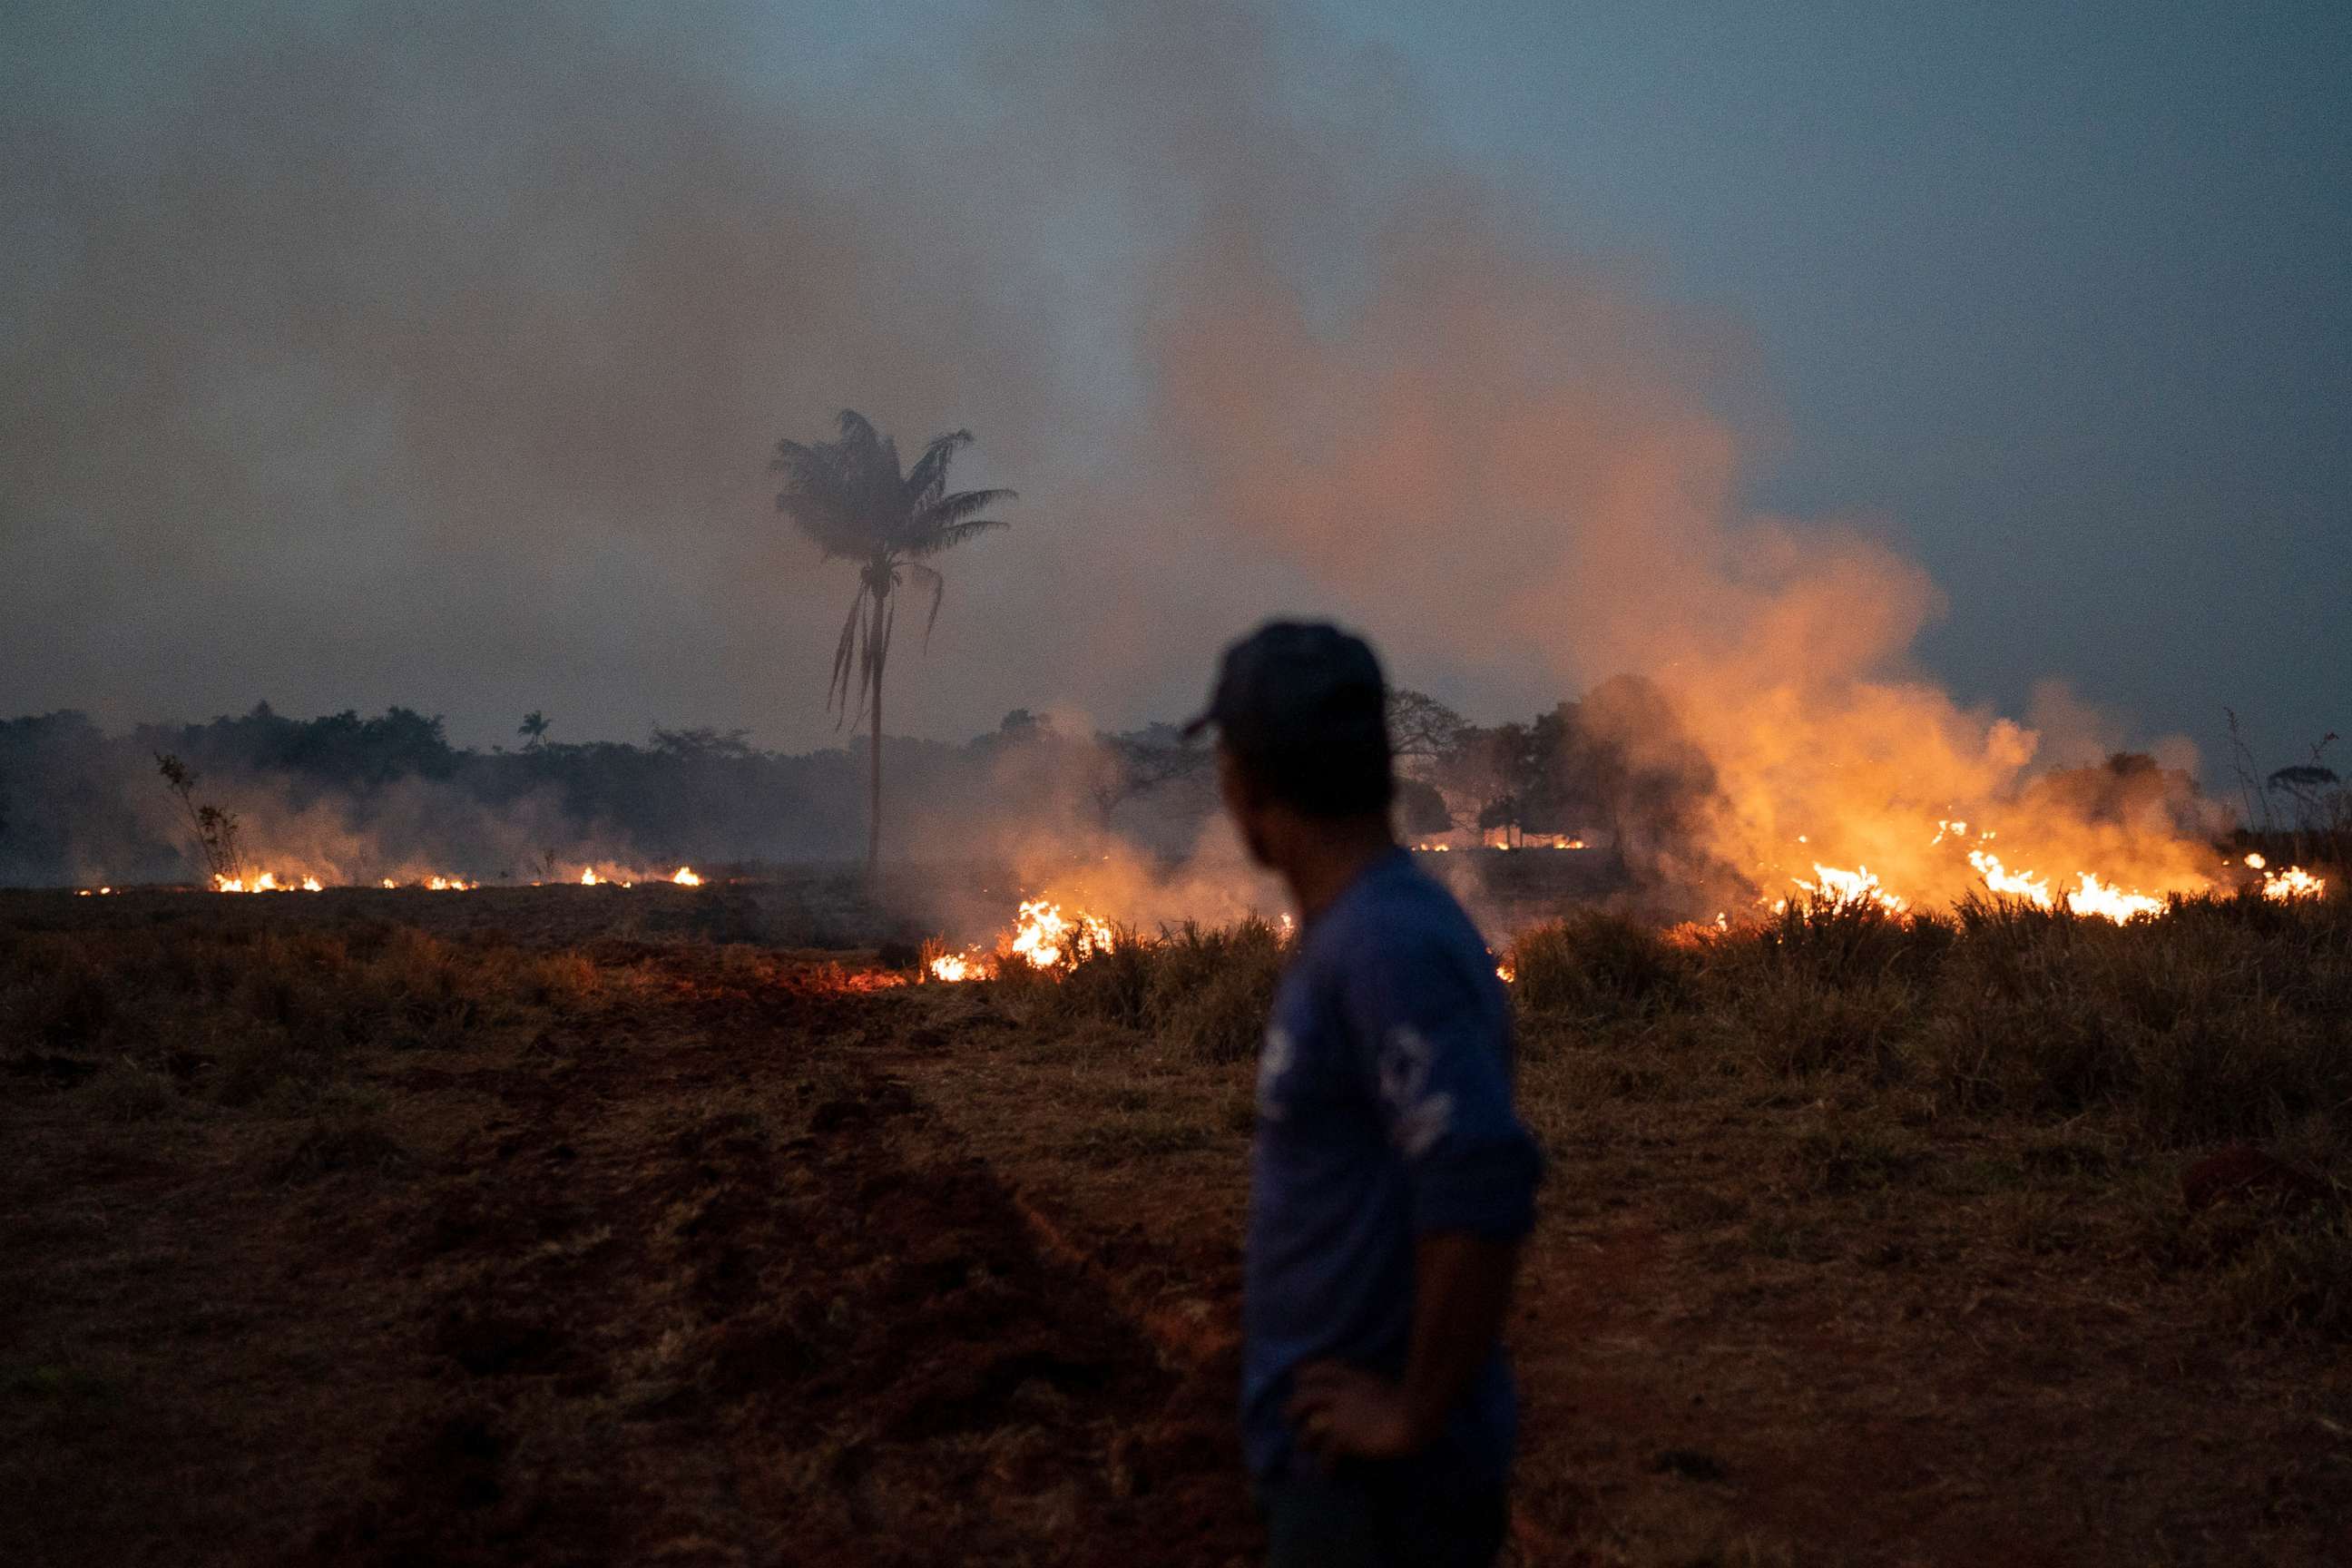 PHOTO: Neri dos Santos Silva watches an encroaching fire threat after digging trenches to keep the flames from spreading to the farm he works on, in the Nova Santa Helena municipality, in the state of Mato Grosso, Brazil, Friday, Aug. 23, 2019.